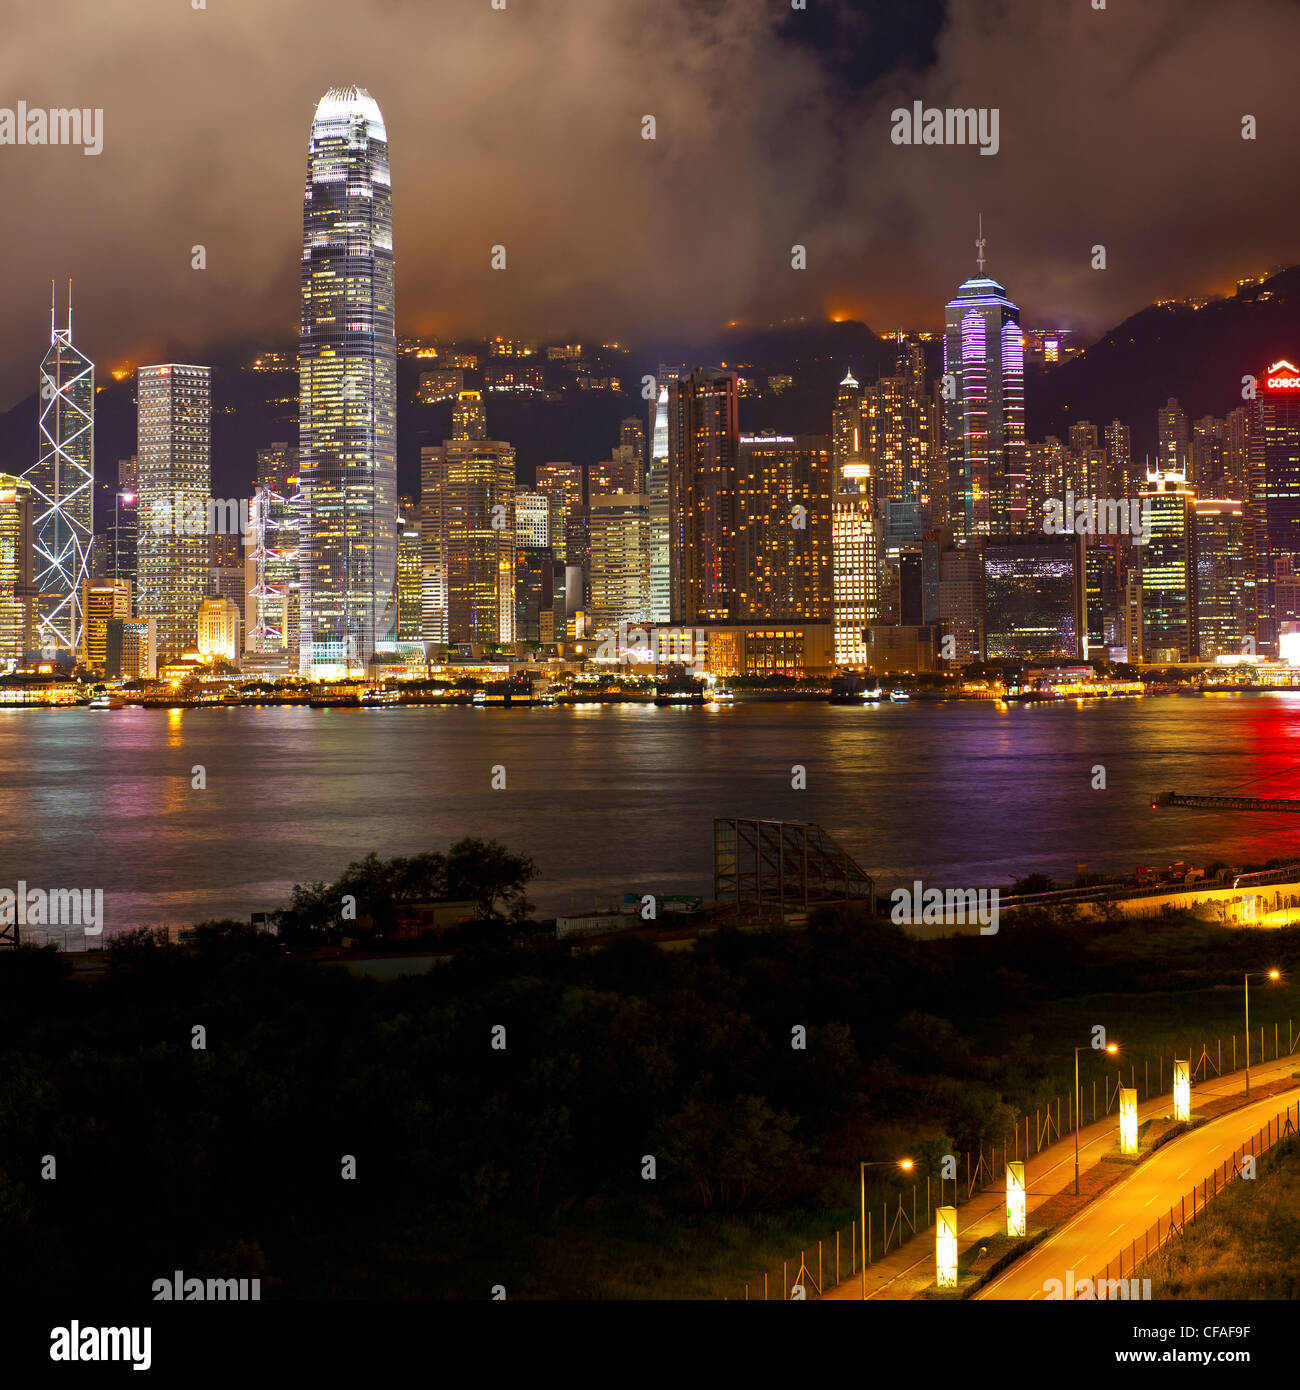 Elevated view across the busy Hong Kong harbour, Central district of Hong Kong Island and Victoria Peak, Hong Kong, China Stock Photo